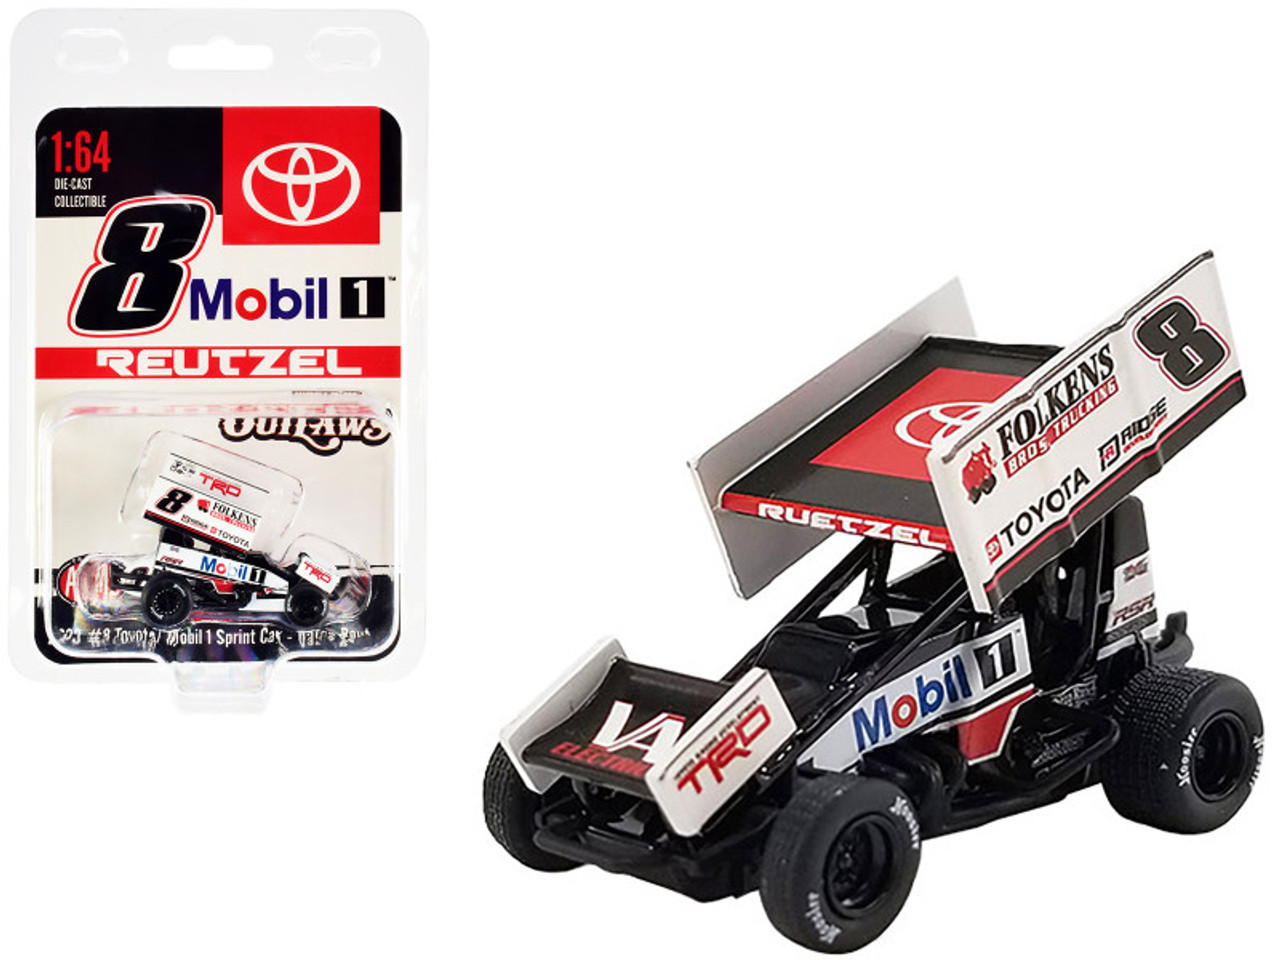 Winged Sprint Car #8 Aaron Reutzel "Mobil 1" Roth Motorsports "World of Outlaws" (2022) 1/64 Diecast Model Car by ACME